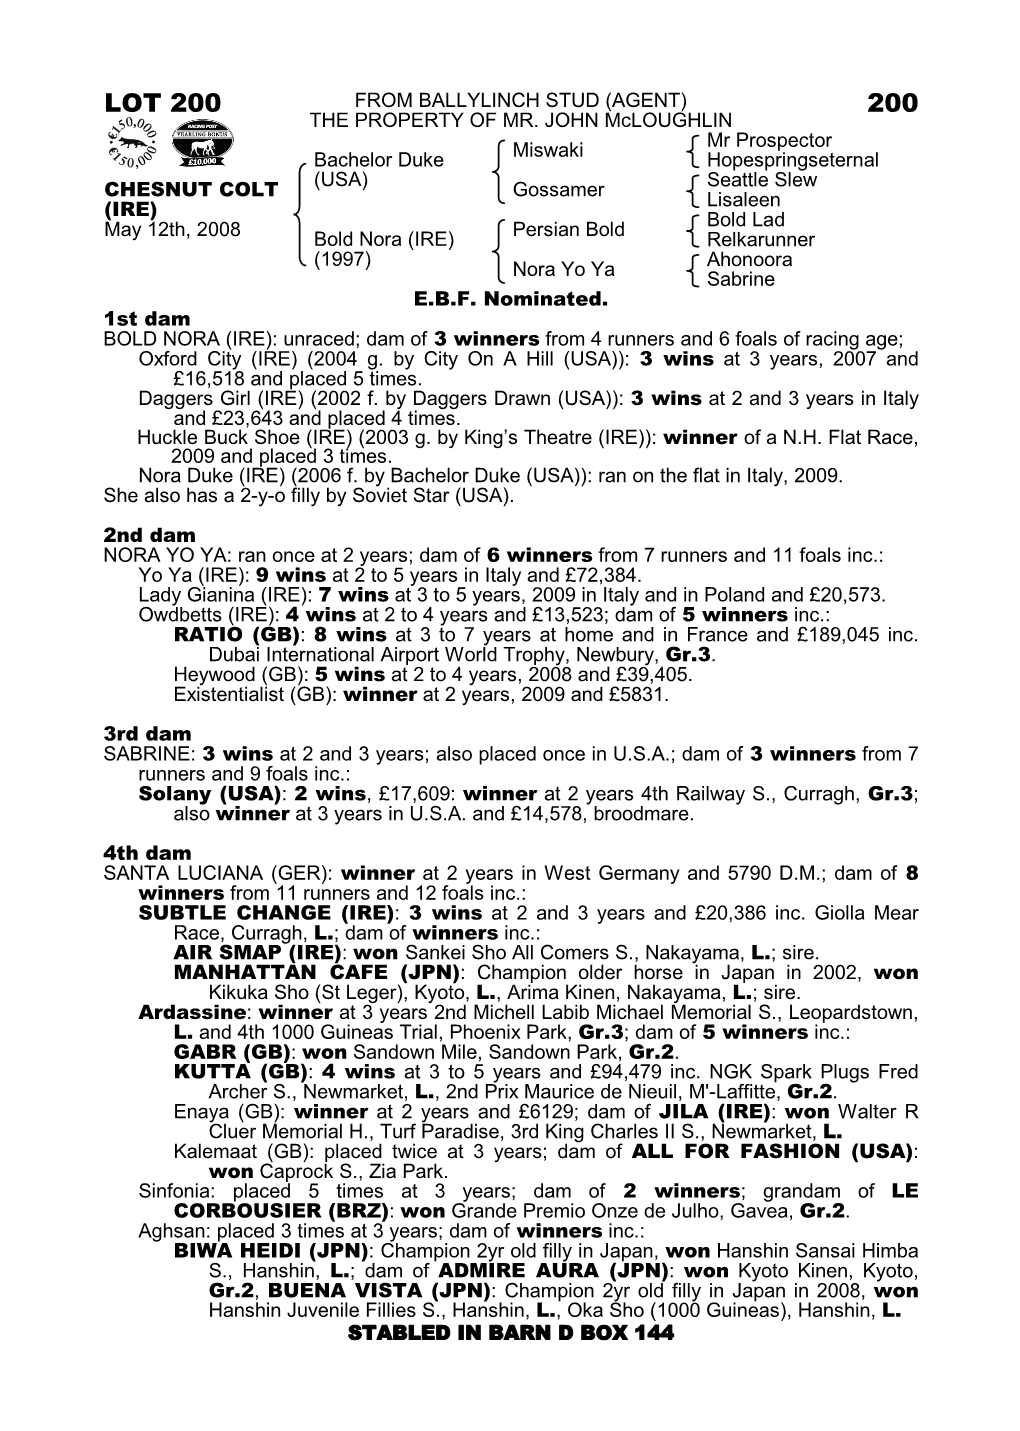 Lot 200 from Ballylinch Stud (Agent) 200 the Property of Mr